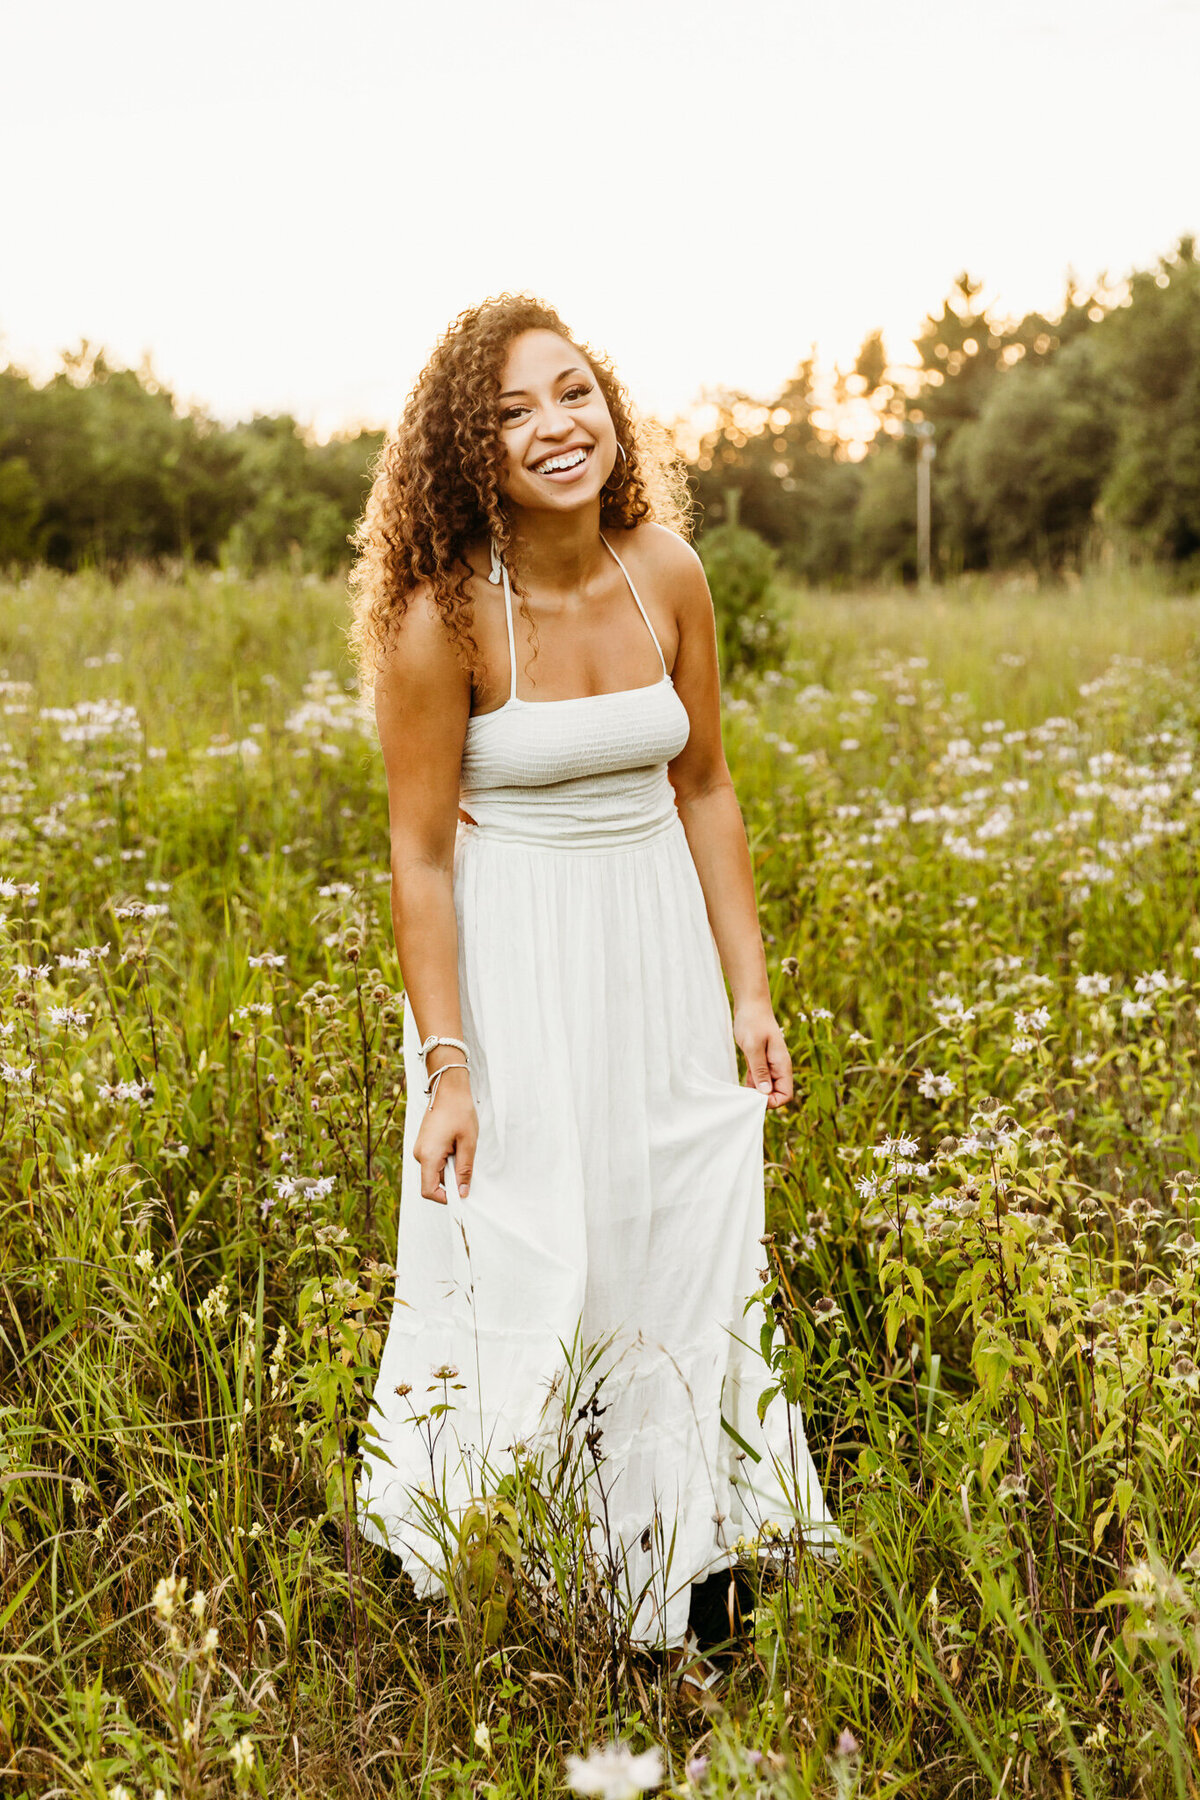 girl in a white dress laughing in a field of wildflowers as the sun sets